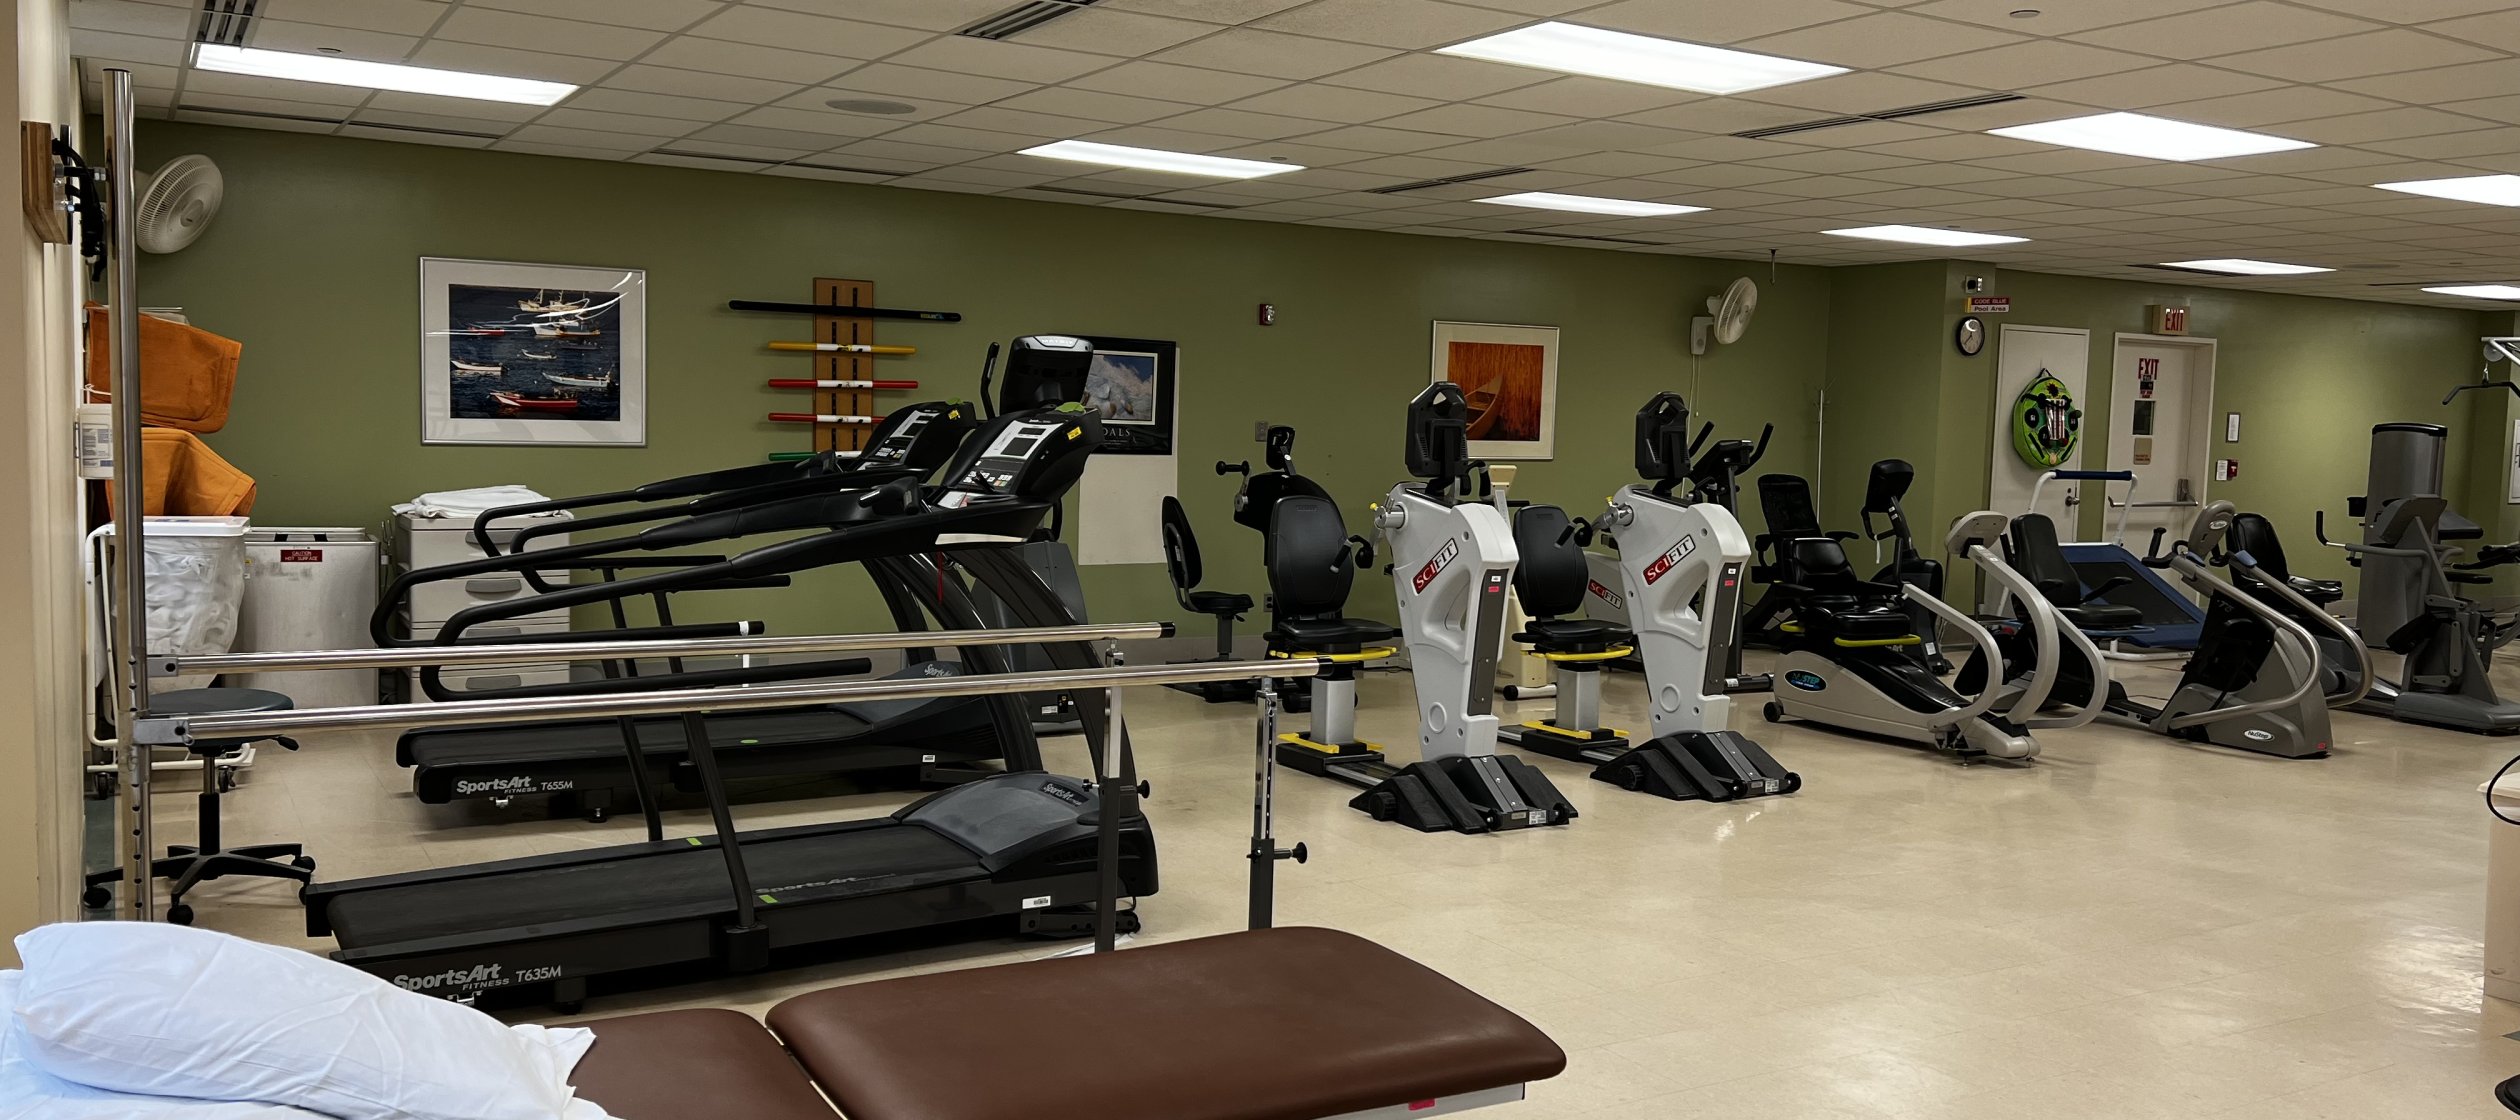 A room filled with gym equipment such as treadmills and stair machines used for orthapedic rehabilitation.